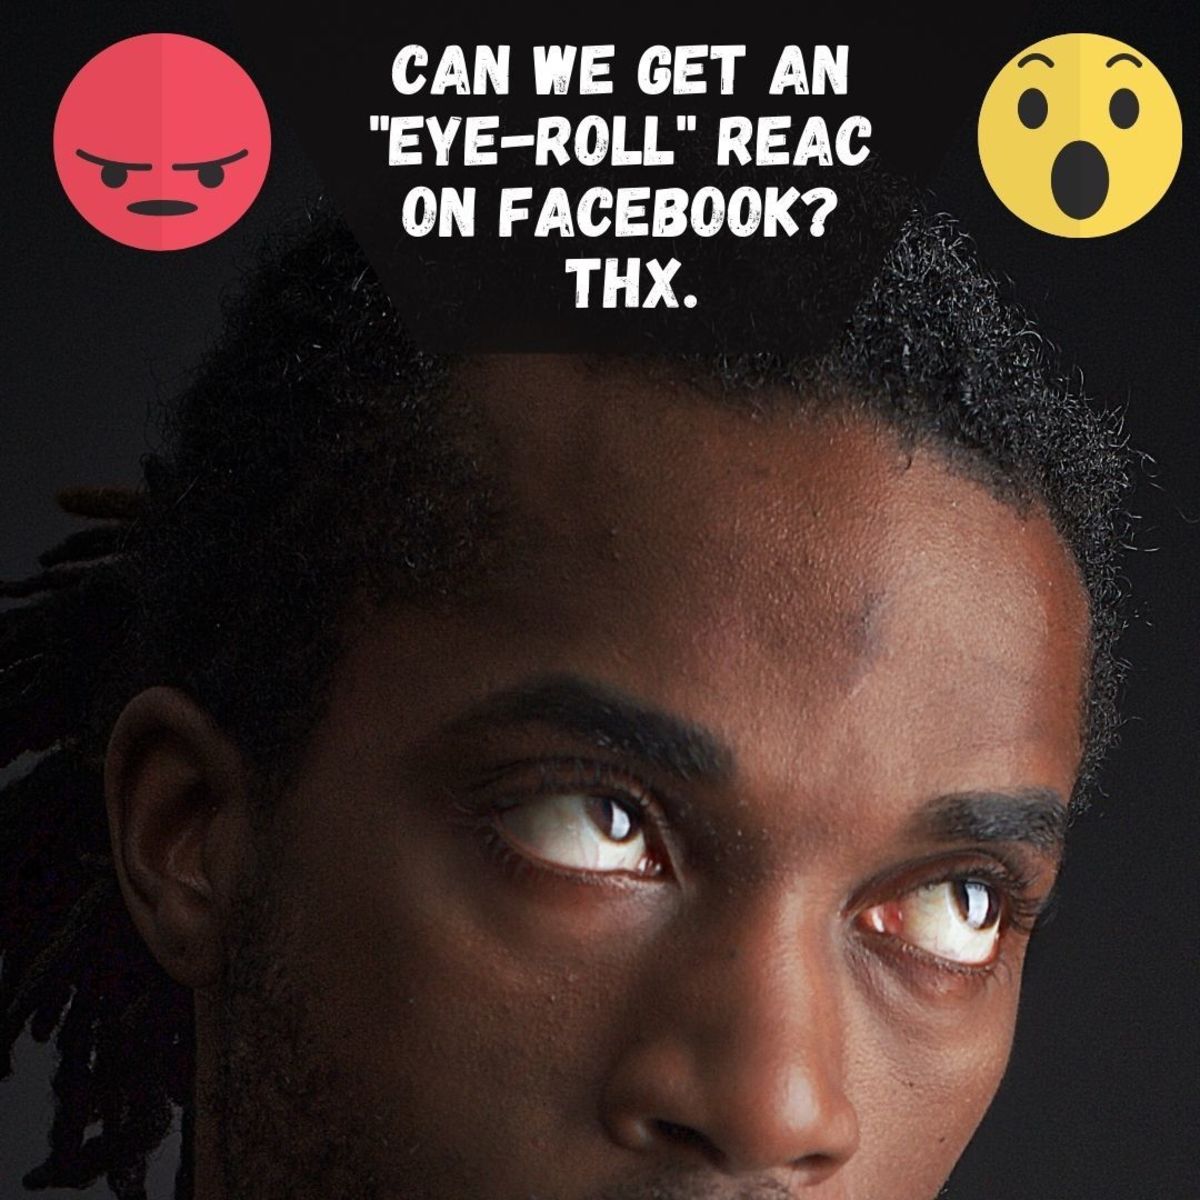 Facebook doesn't have enough reaction options . . . can we start a petition to get this one on the roster?